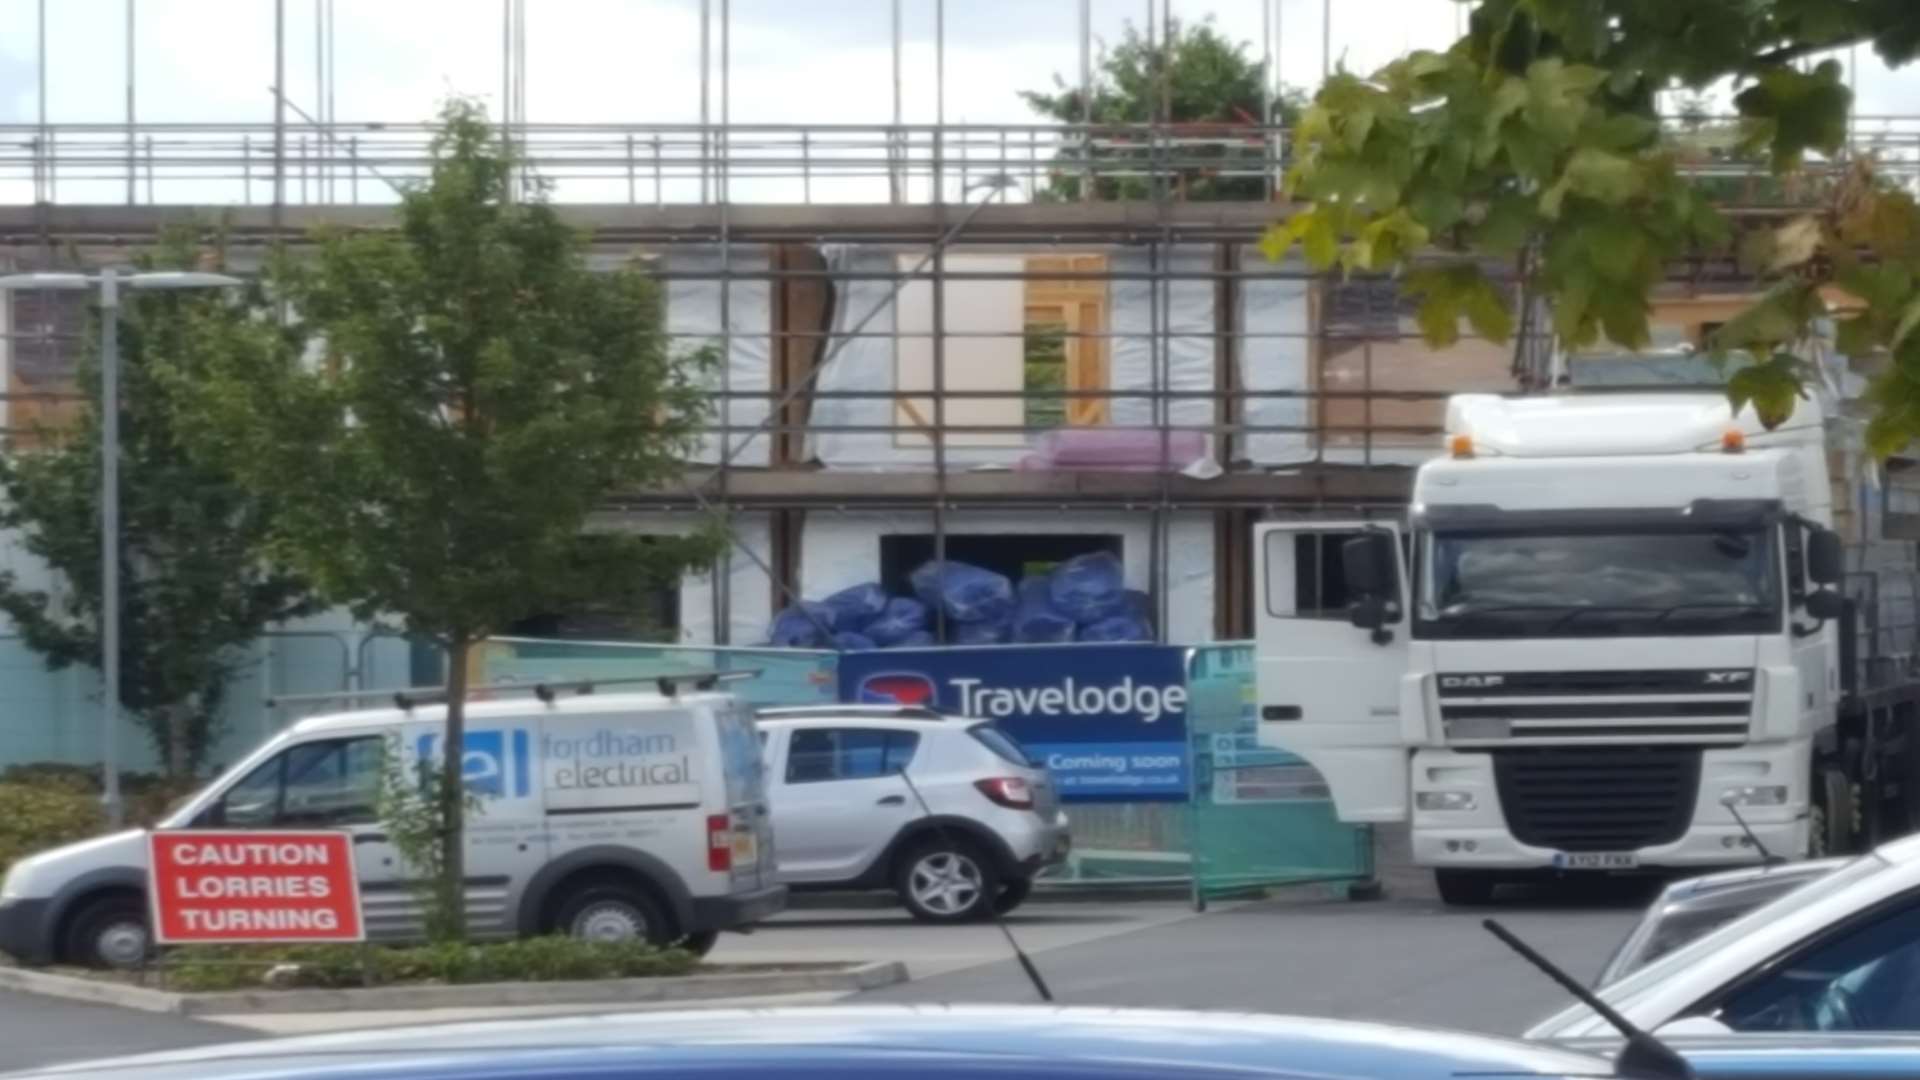 The Travelodge is on the same site as the Toby Carvery